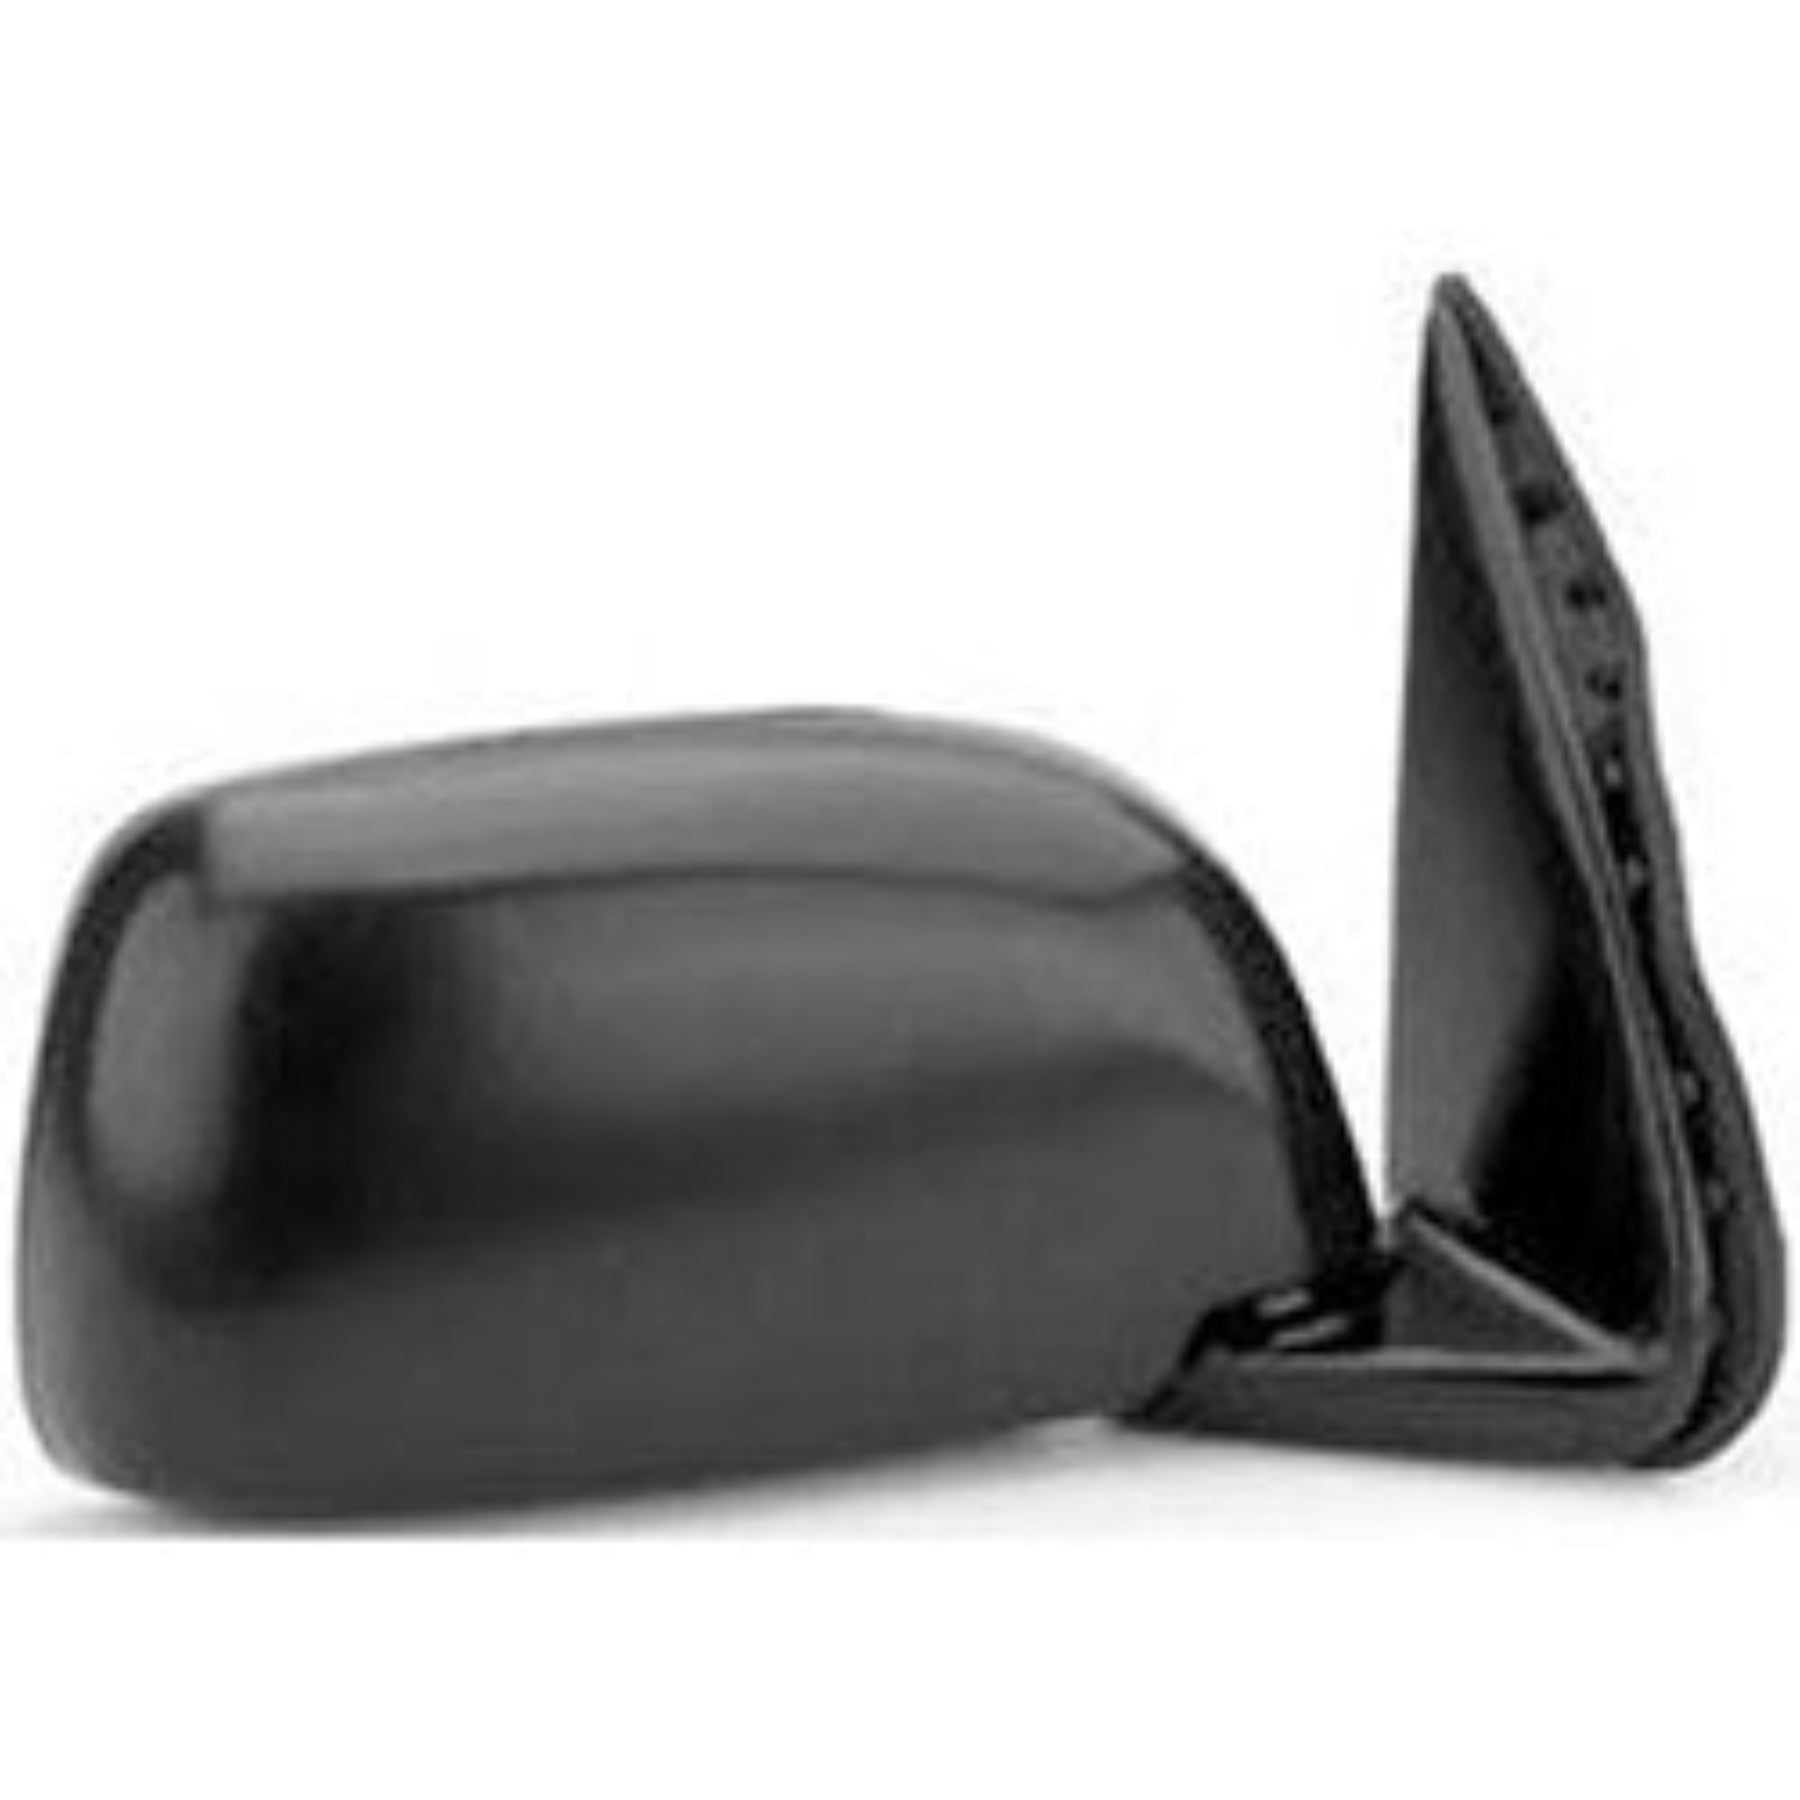 2000-2000 Toyota Tacoma Mirror (Passenger Side); Pick-up; 2WD/4WD; Manual; Manual Folding; Non-Heated; 9 x 7 in. Housing; w/ Off-Road Package; TO1321161; 8791035560